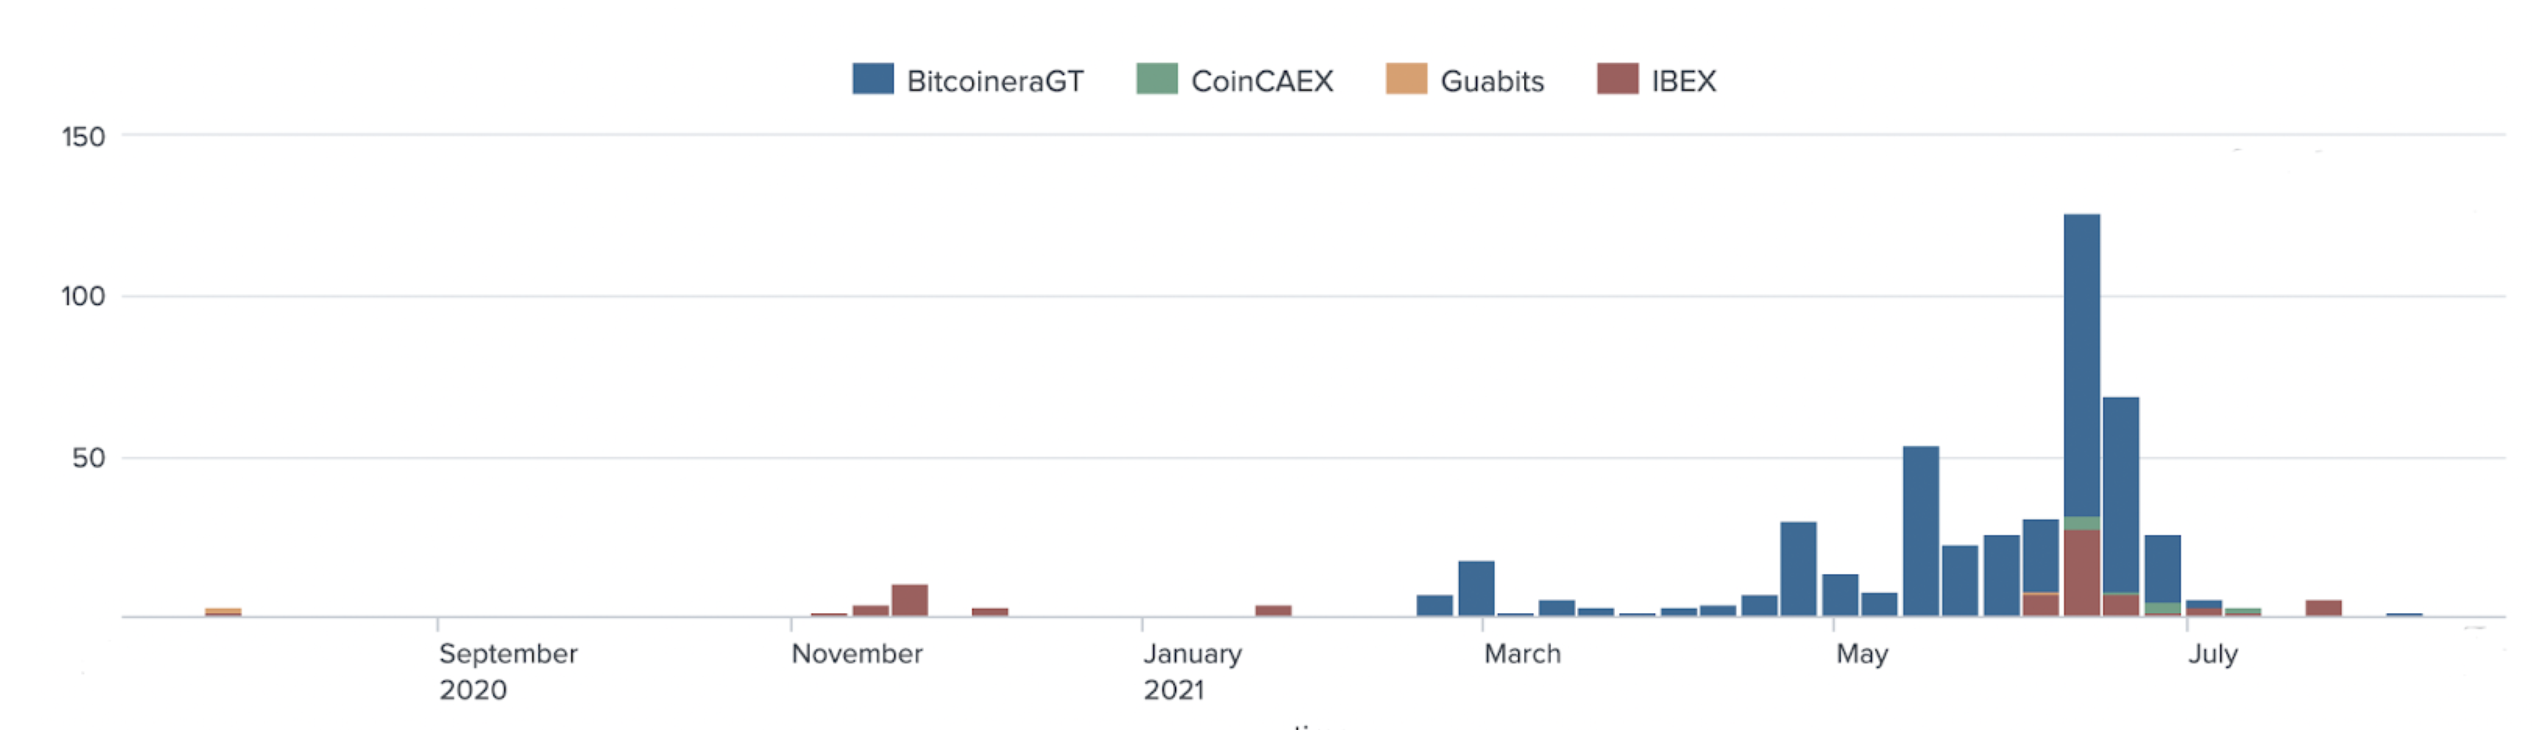 Top remittance-oriented services involving crypto in Guatemala, Twitter mentions count over time